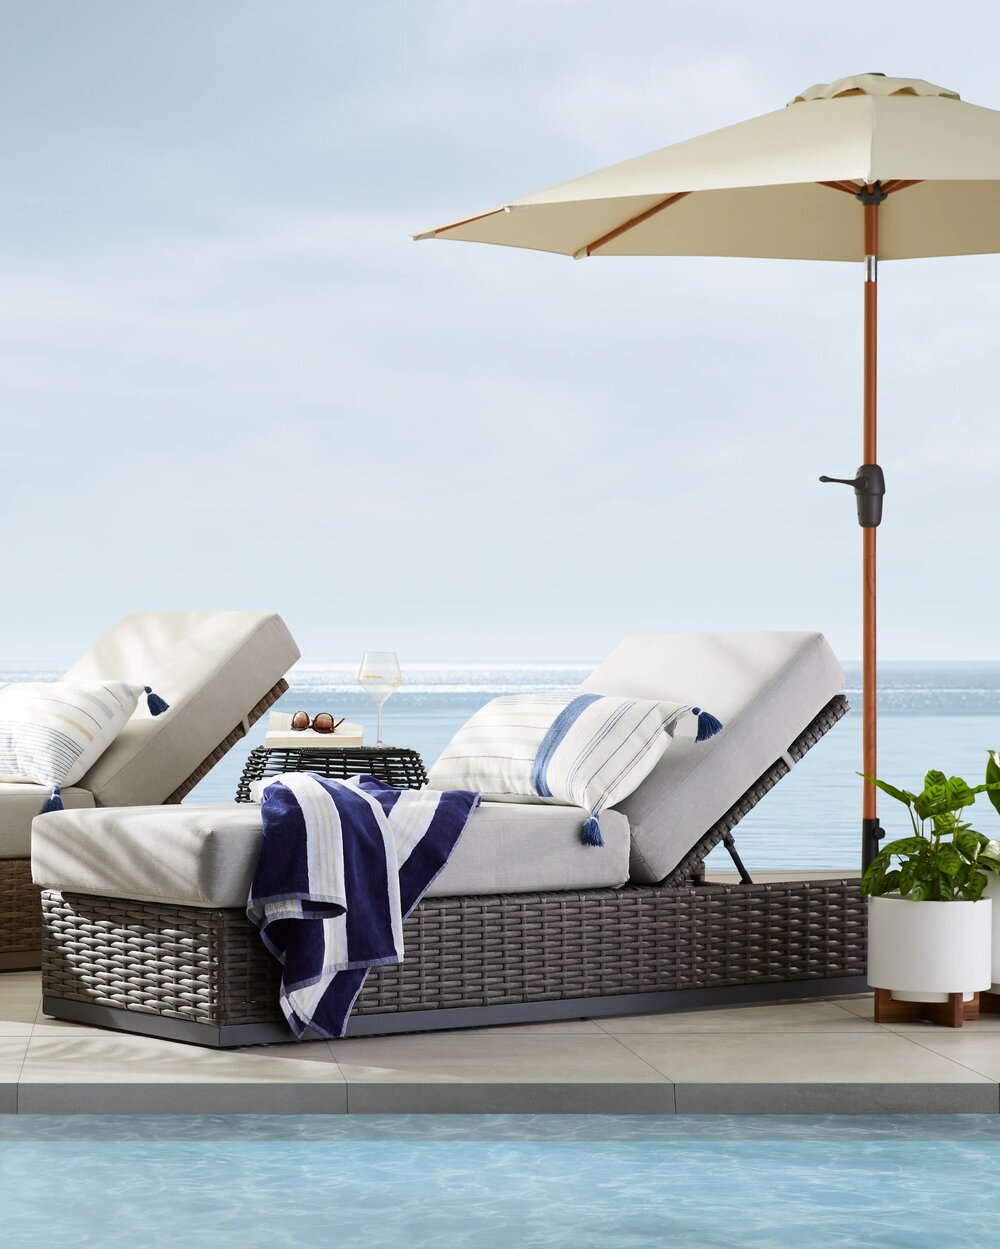 Use your patio all day GlucksteinHome Sedona loungers 